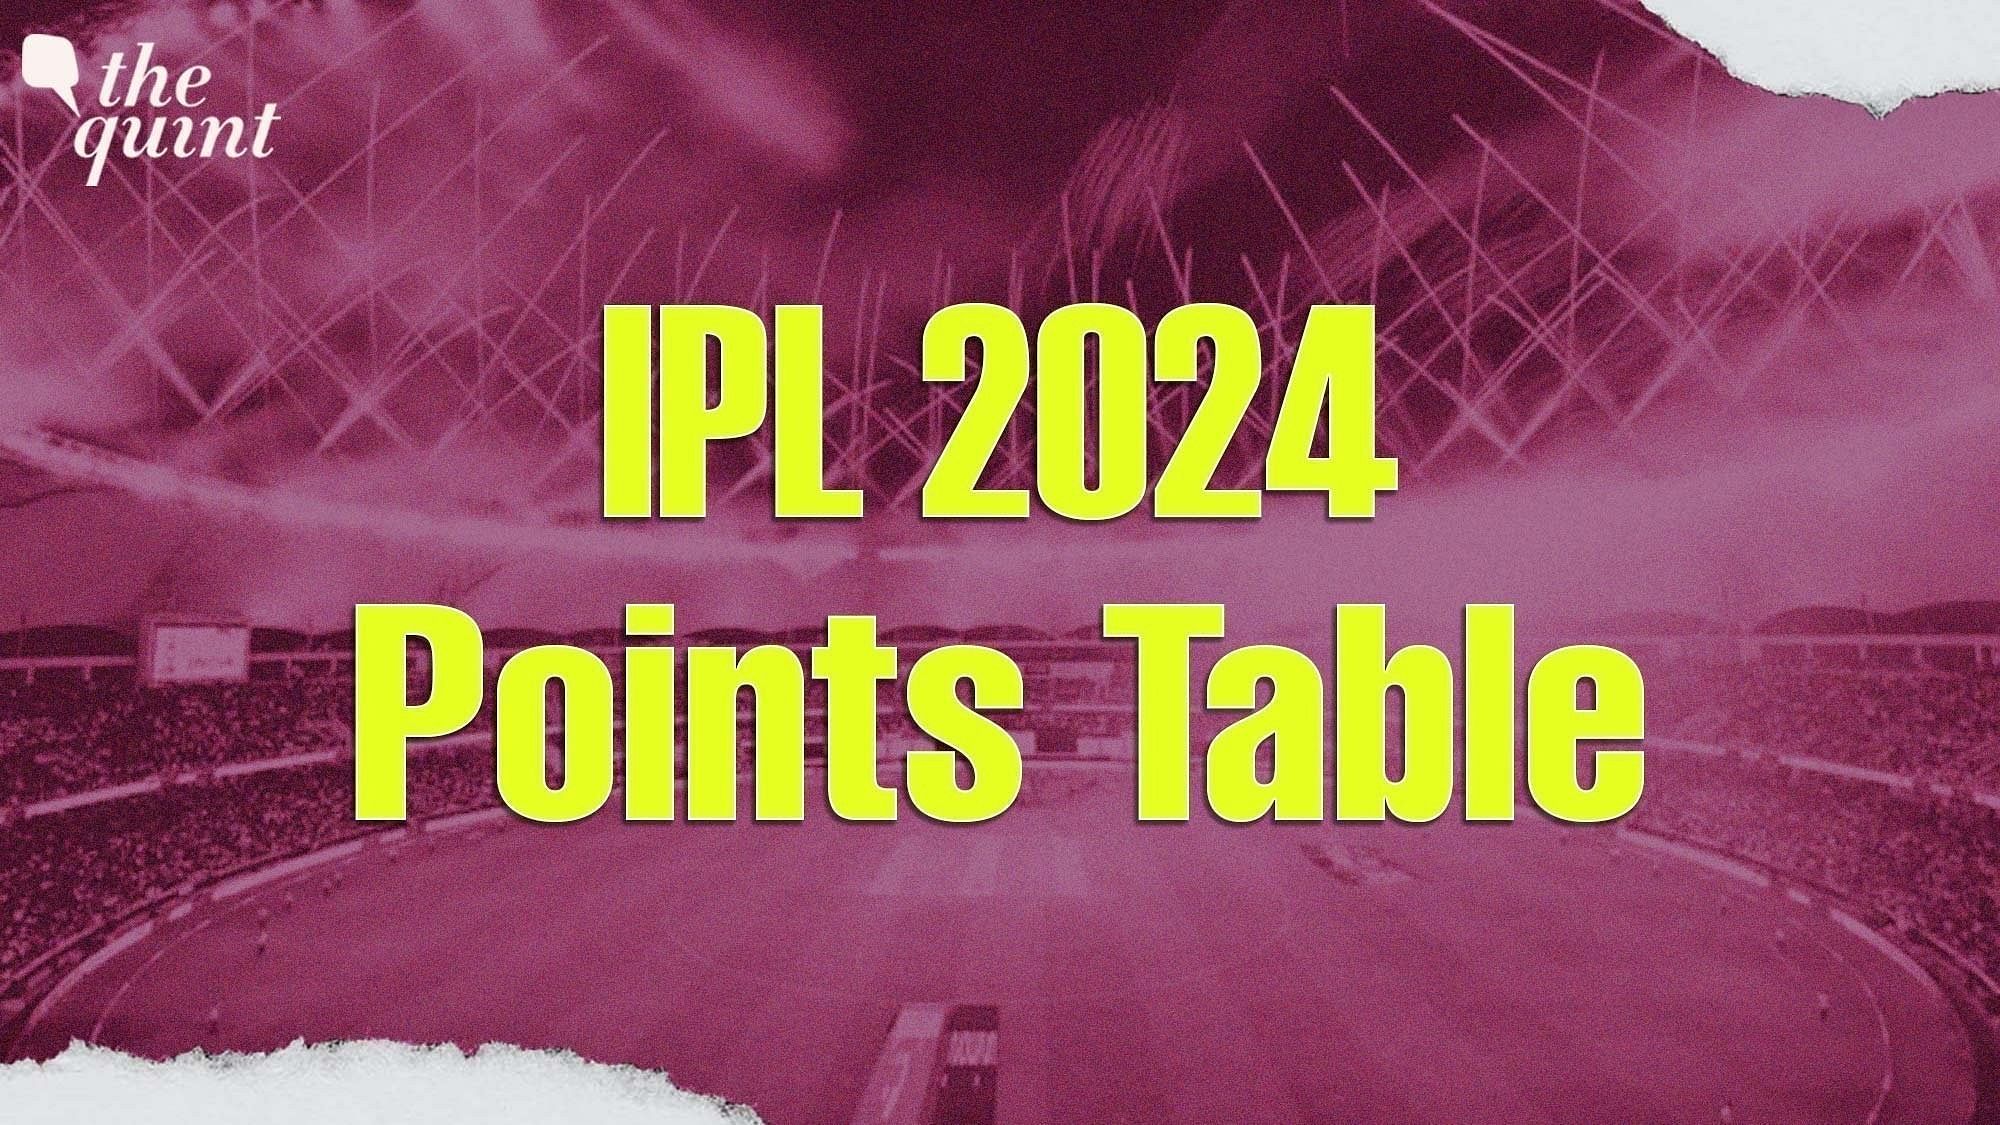 <div class="paragraphs"><p>IPL 2024 Points Table: Know the total points of all teams after the GT vs CSK match on Friday, 10 May.</p></div>